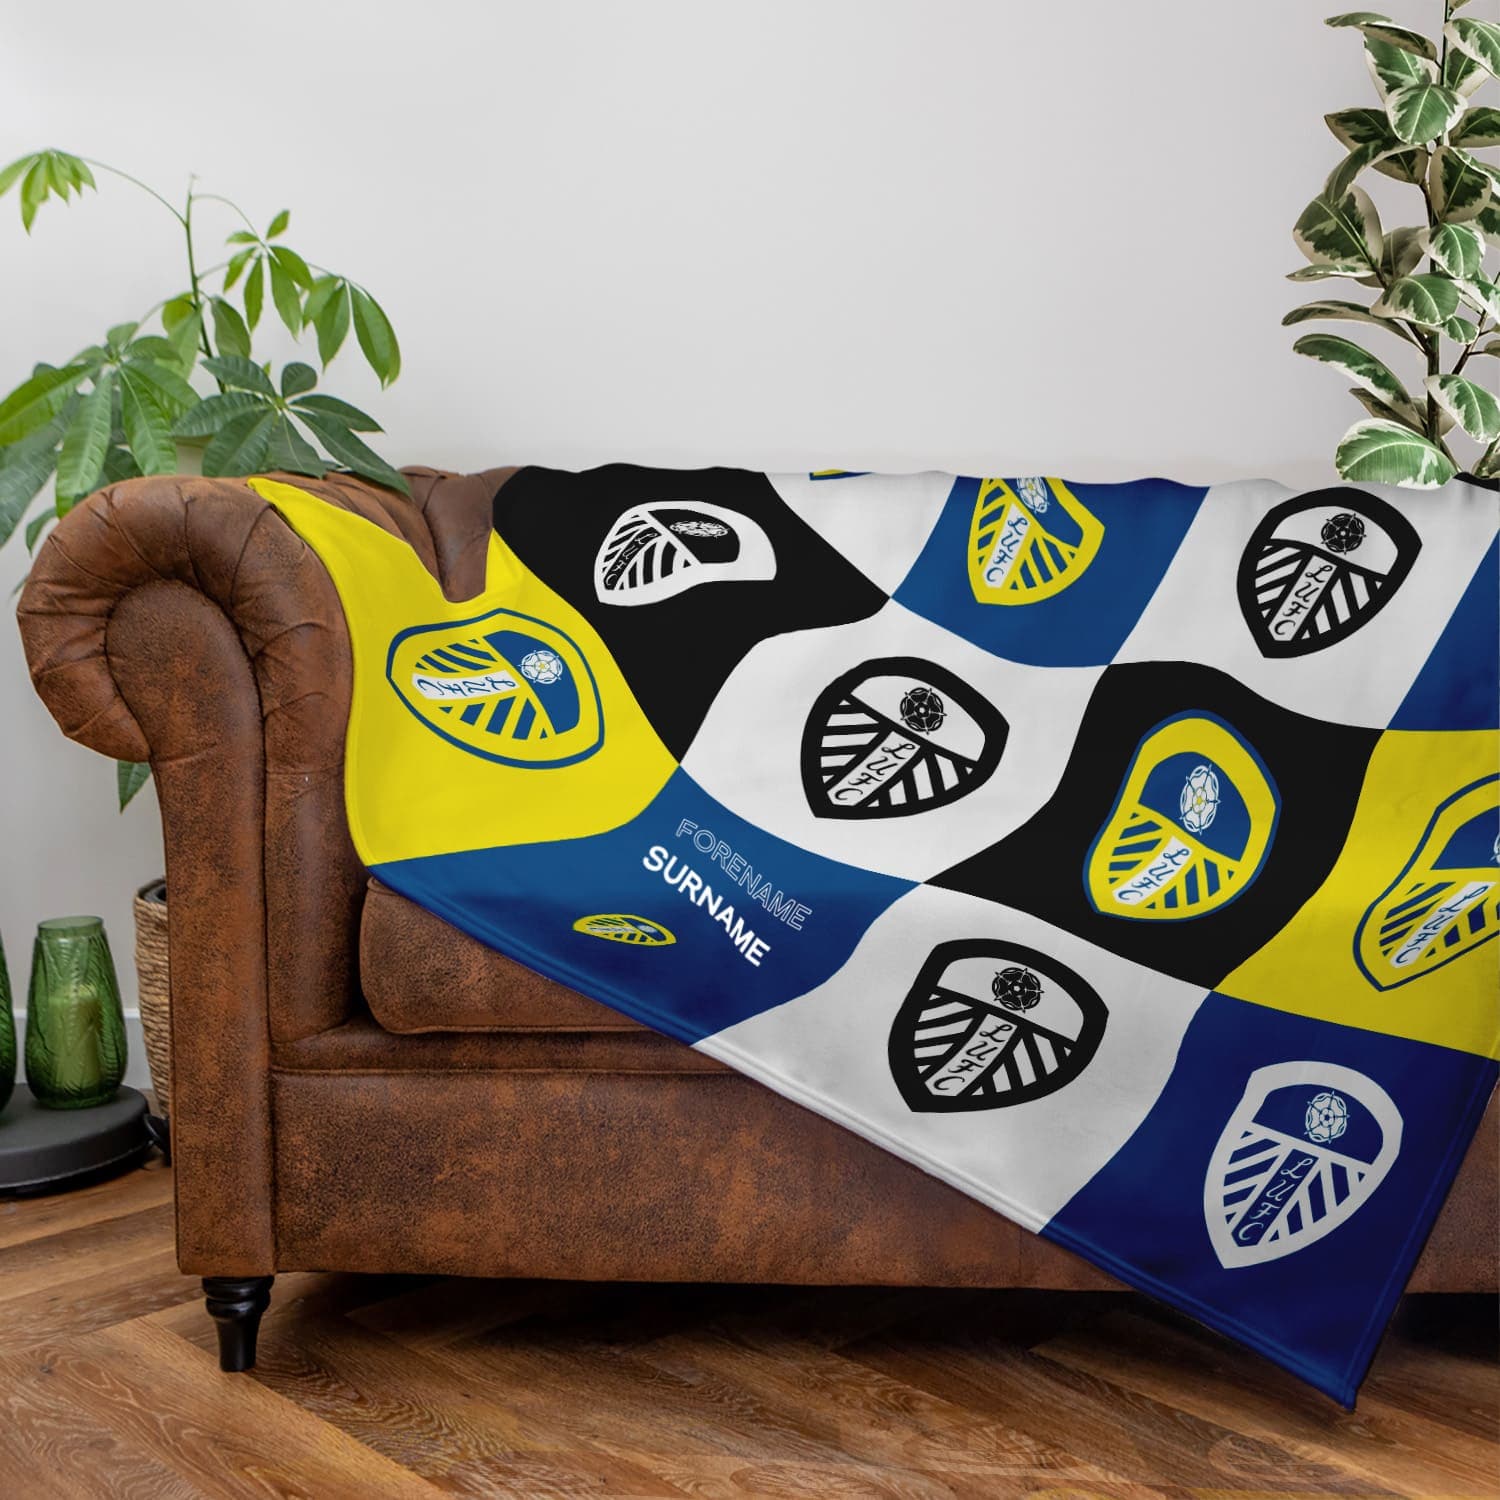 Leeds United FC - Chequered Fleece Blanket - Officially Licenced